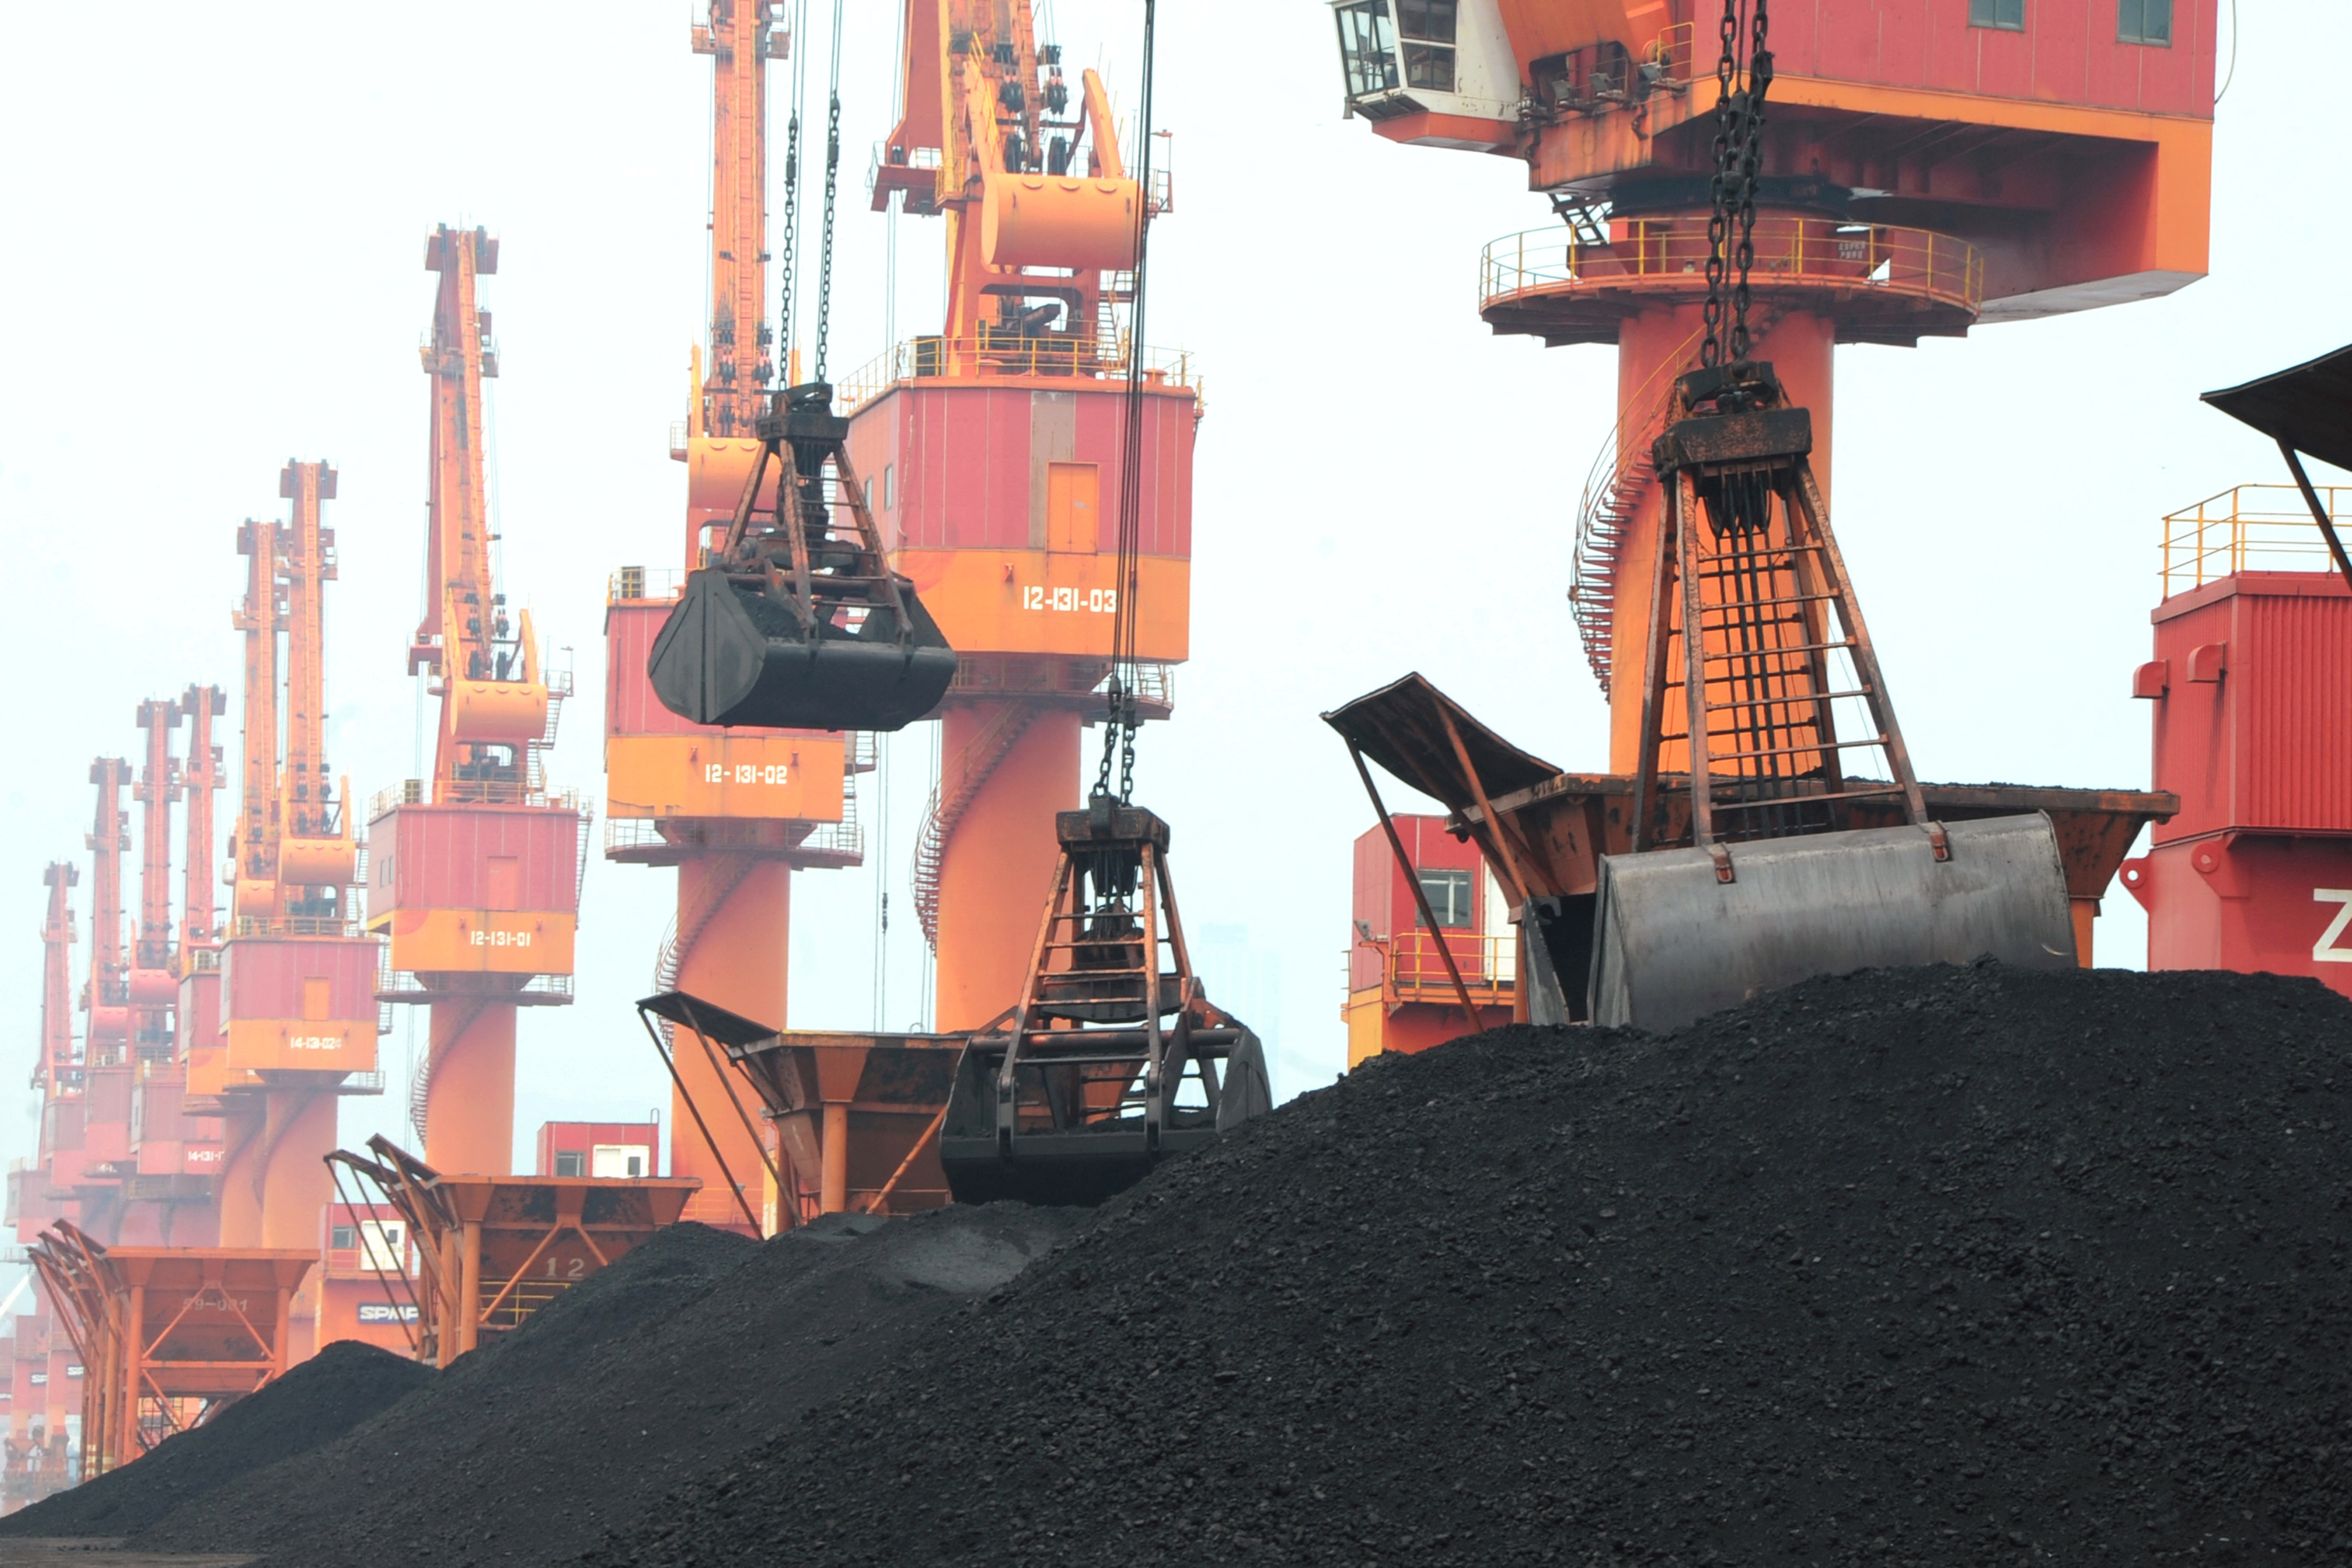 Imported coal is seen lifted by cranes from a coal cargo ship at a port in Lianyungang, Jiangsu